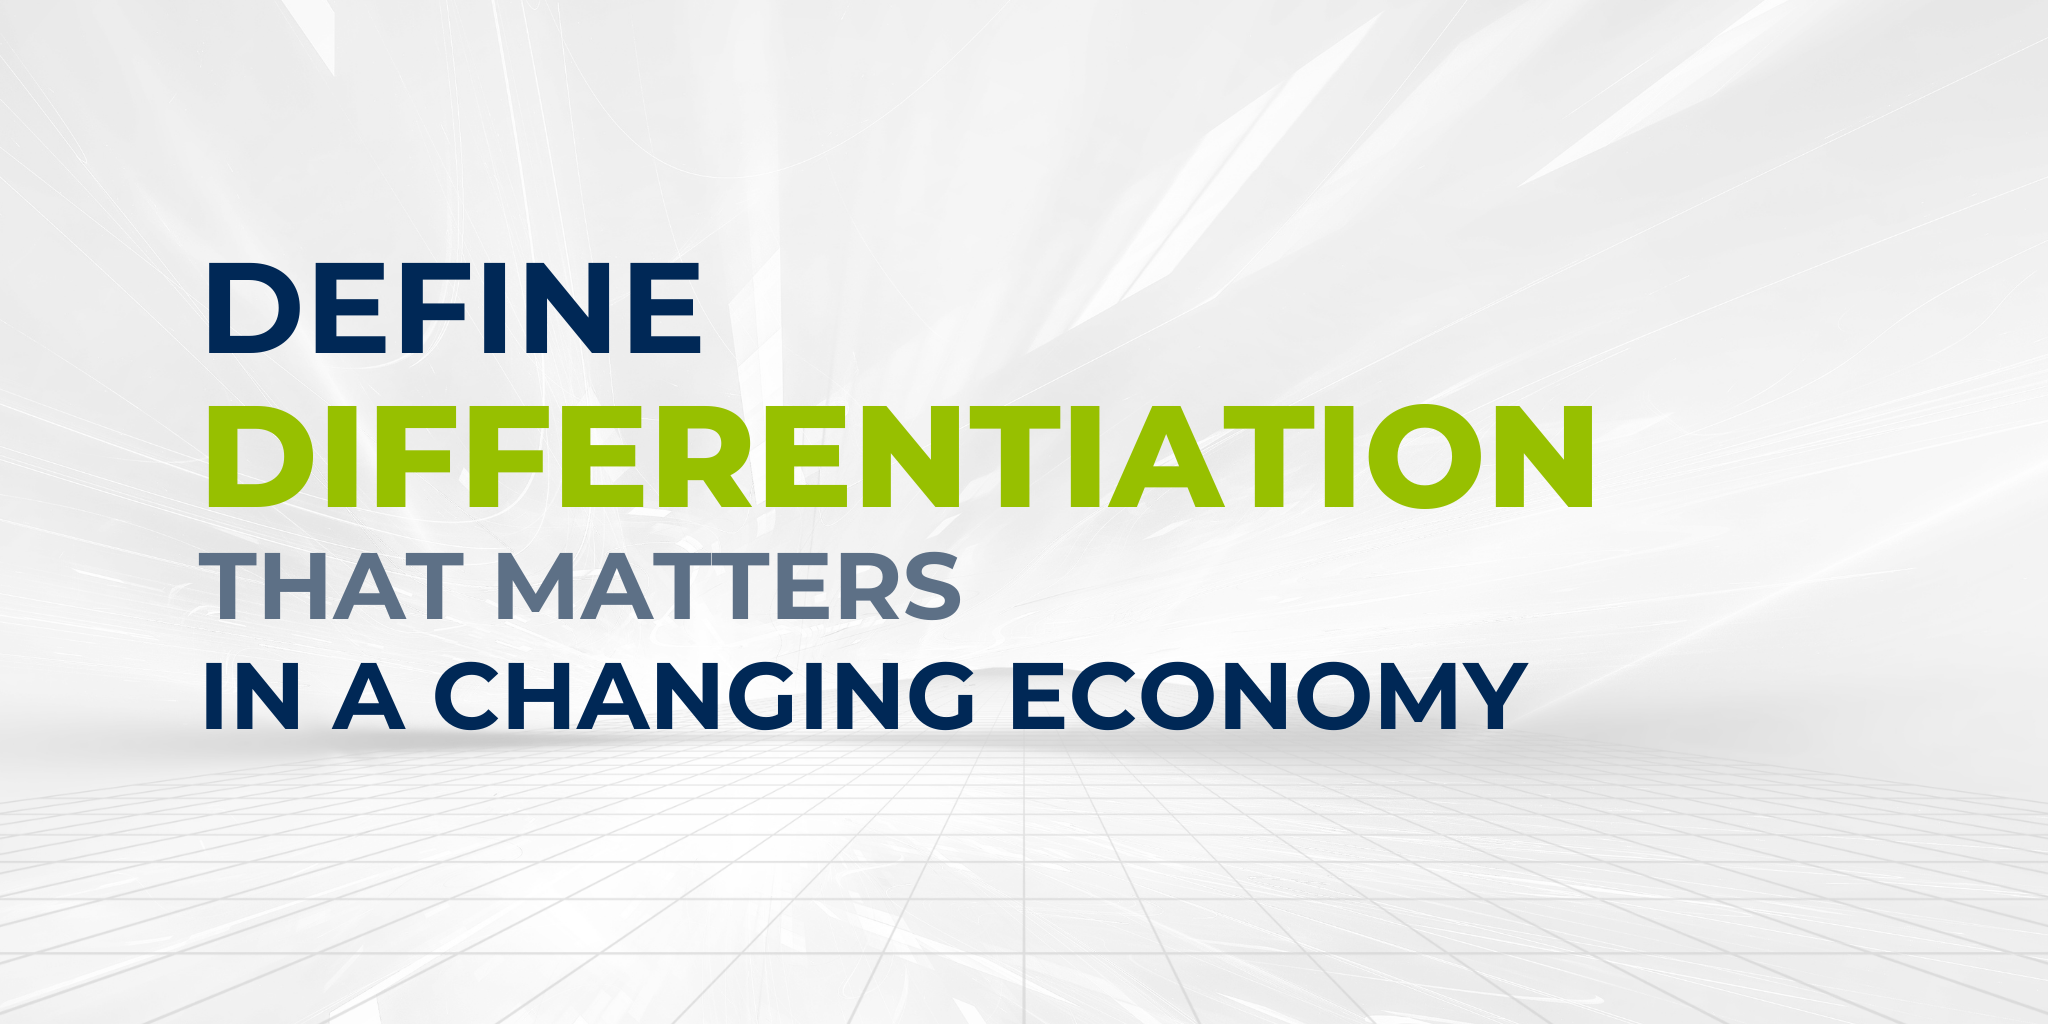 How to Define Differentiation that Matters in a Changing Economy